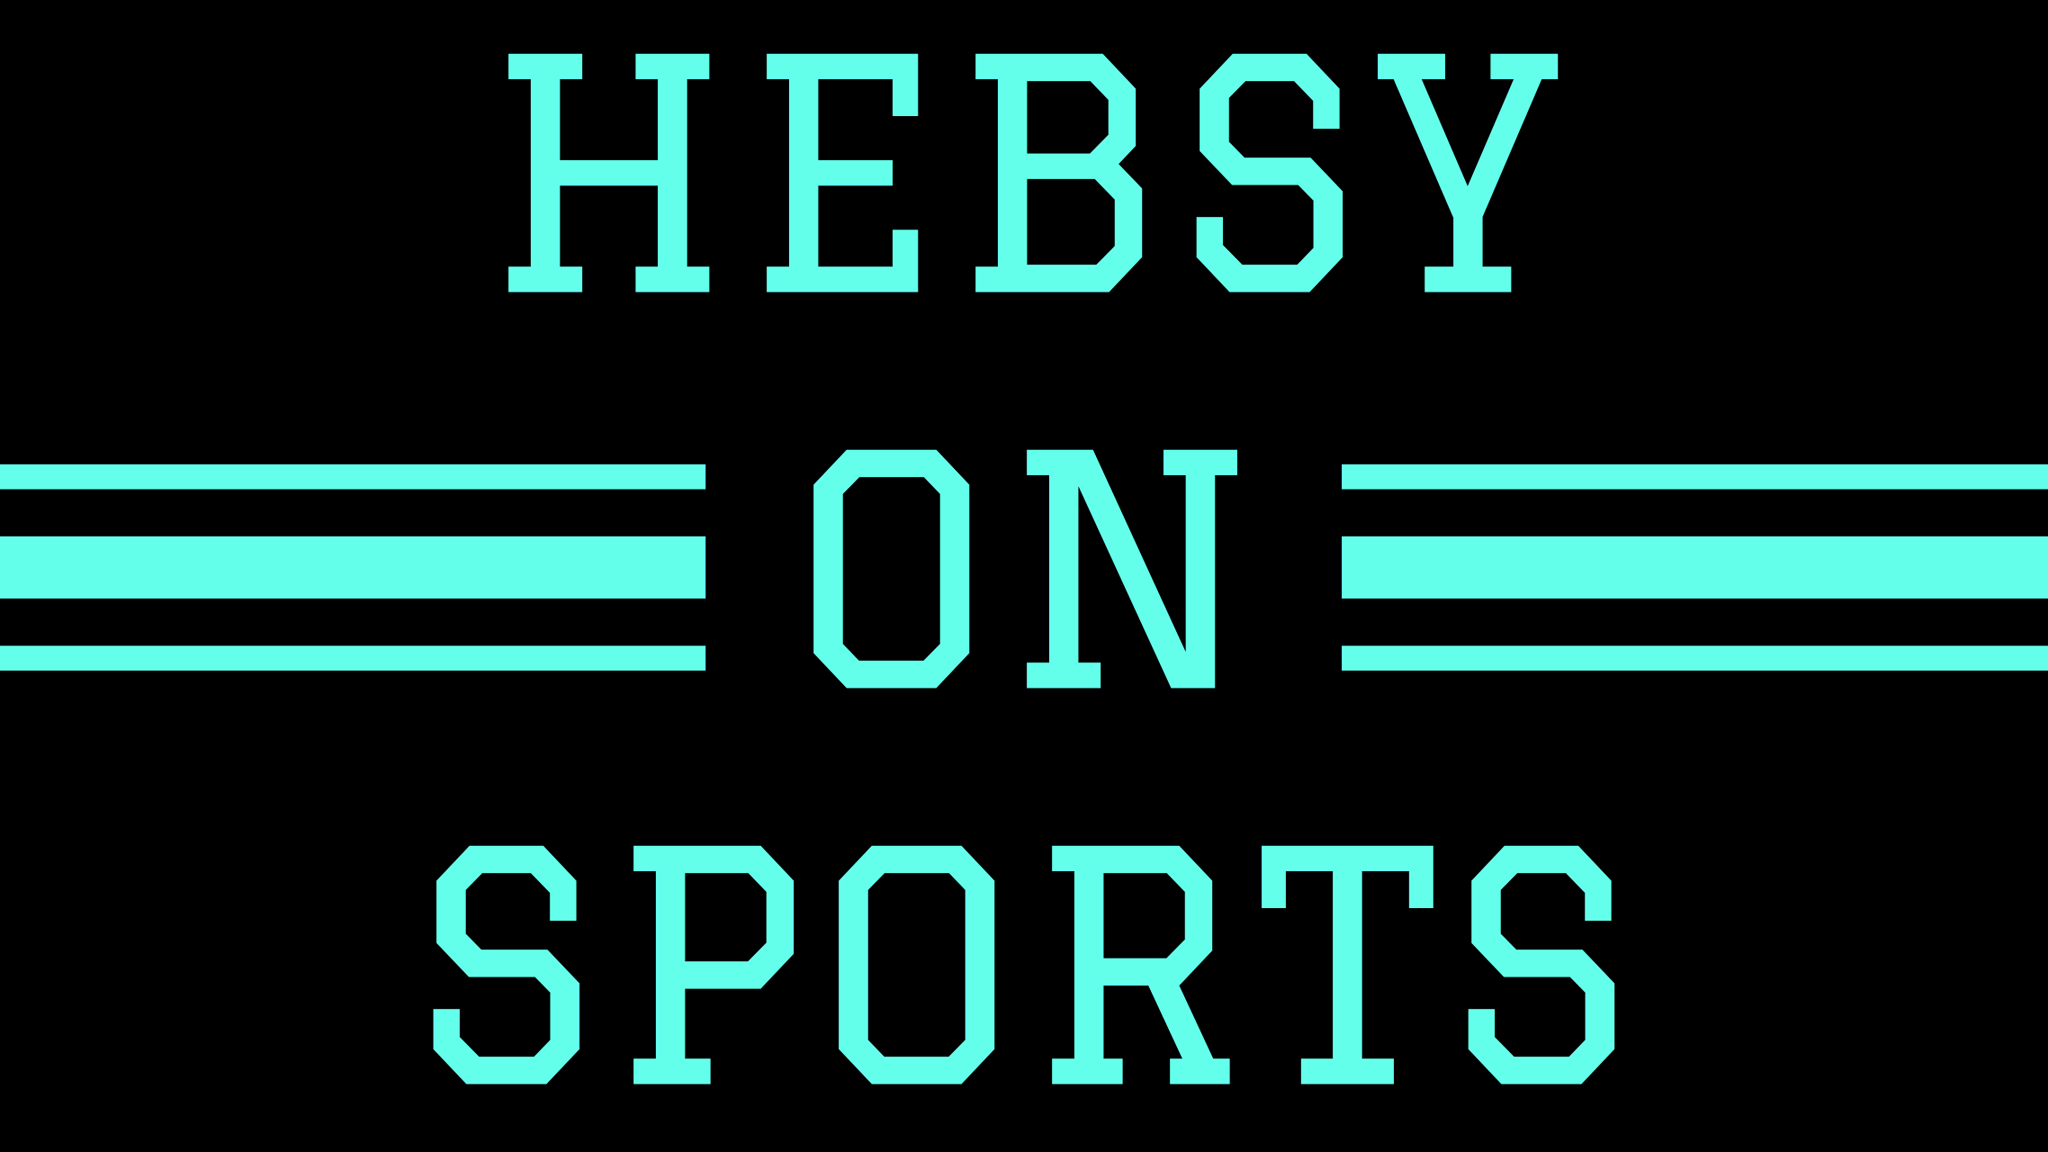 Hebsy on Sports for October 29, 2021